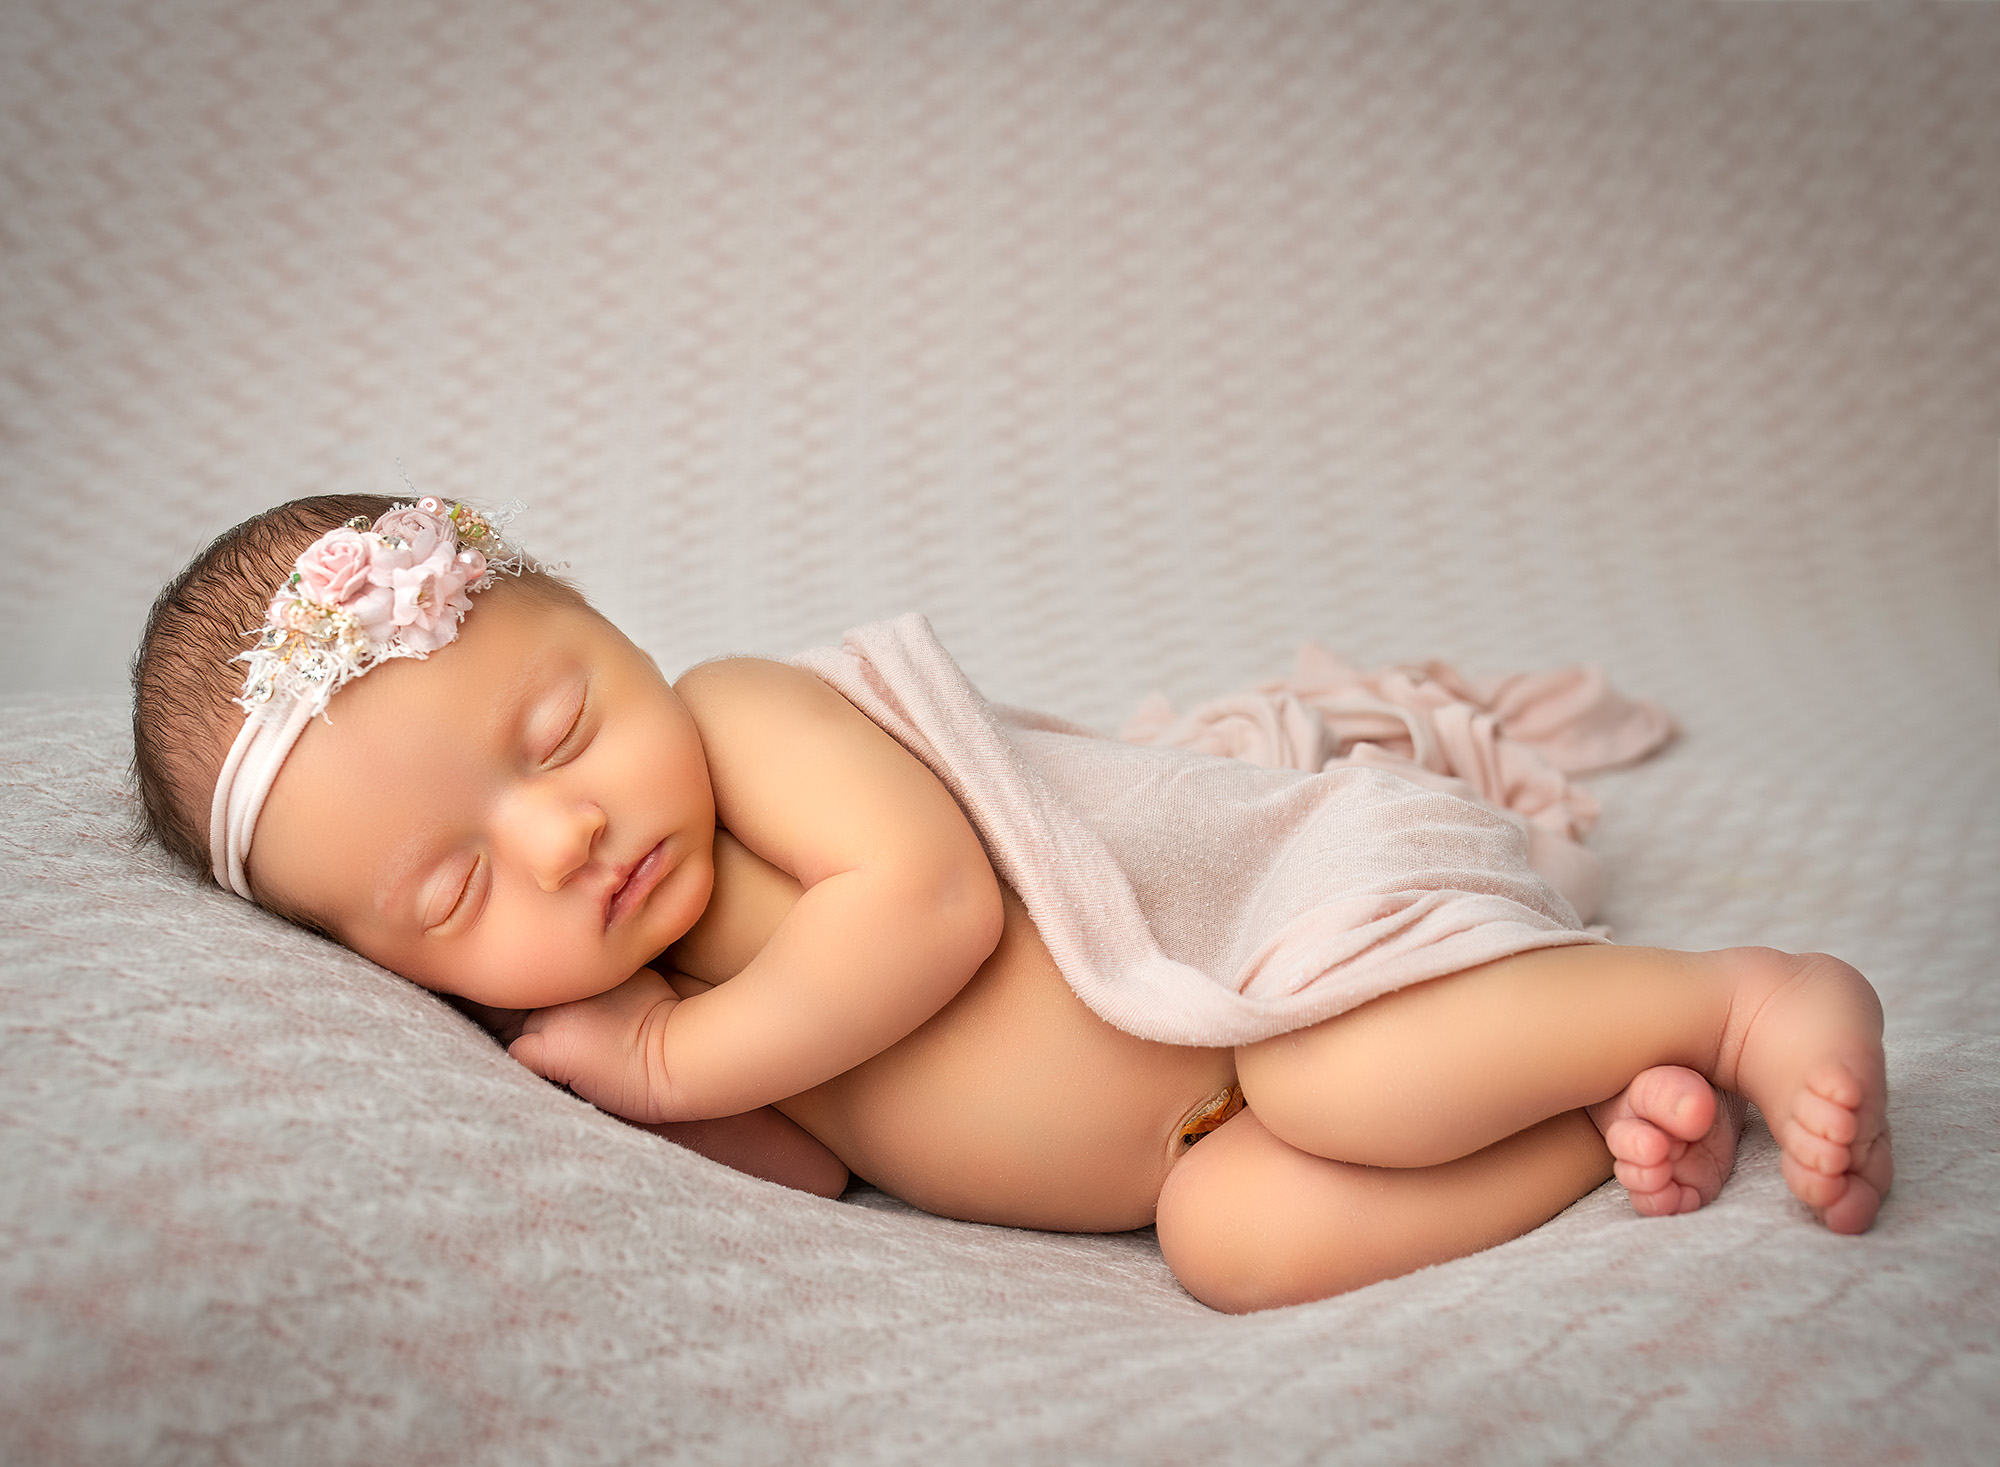 Newborn Family Photographer A simple yet heartwarming scene of a baby sleeping with a pink blanket, evoking warmth and tenderness